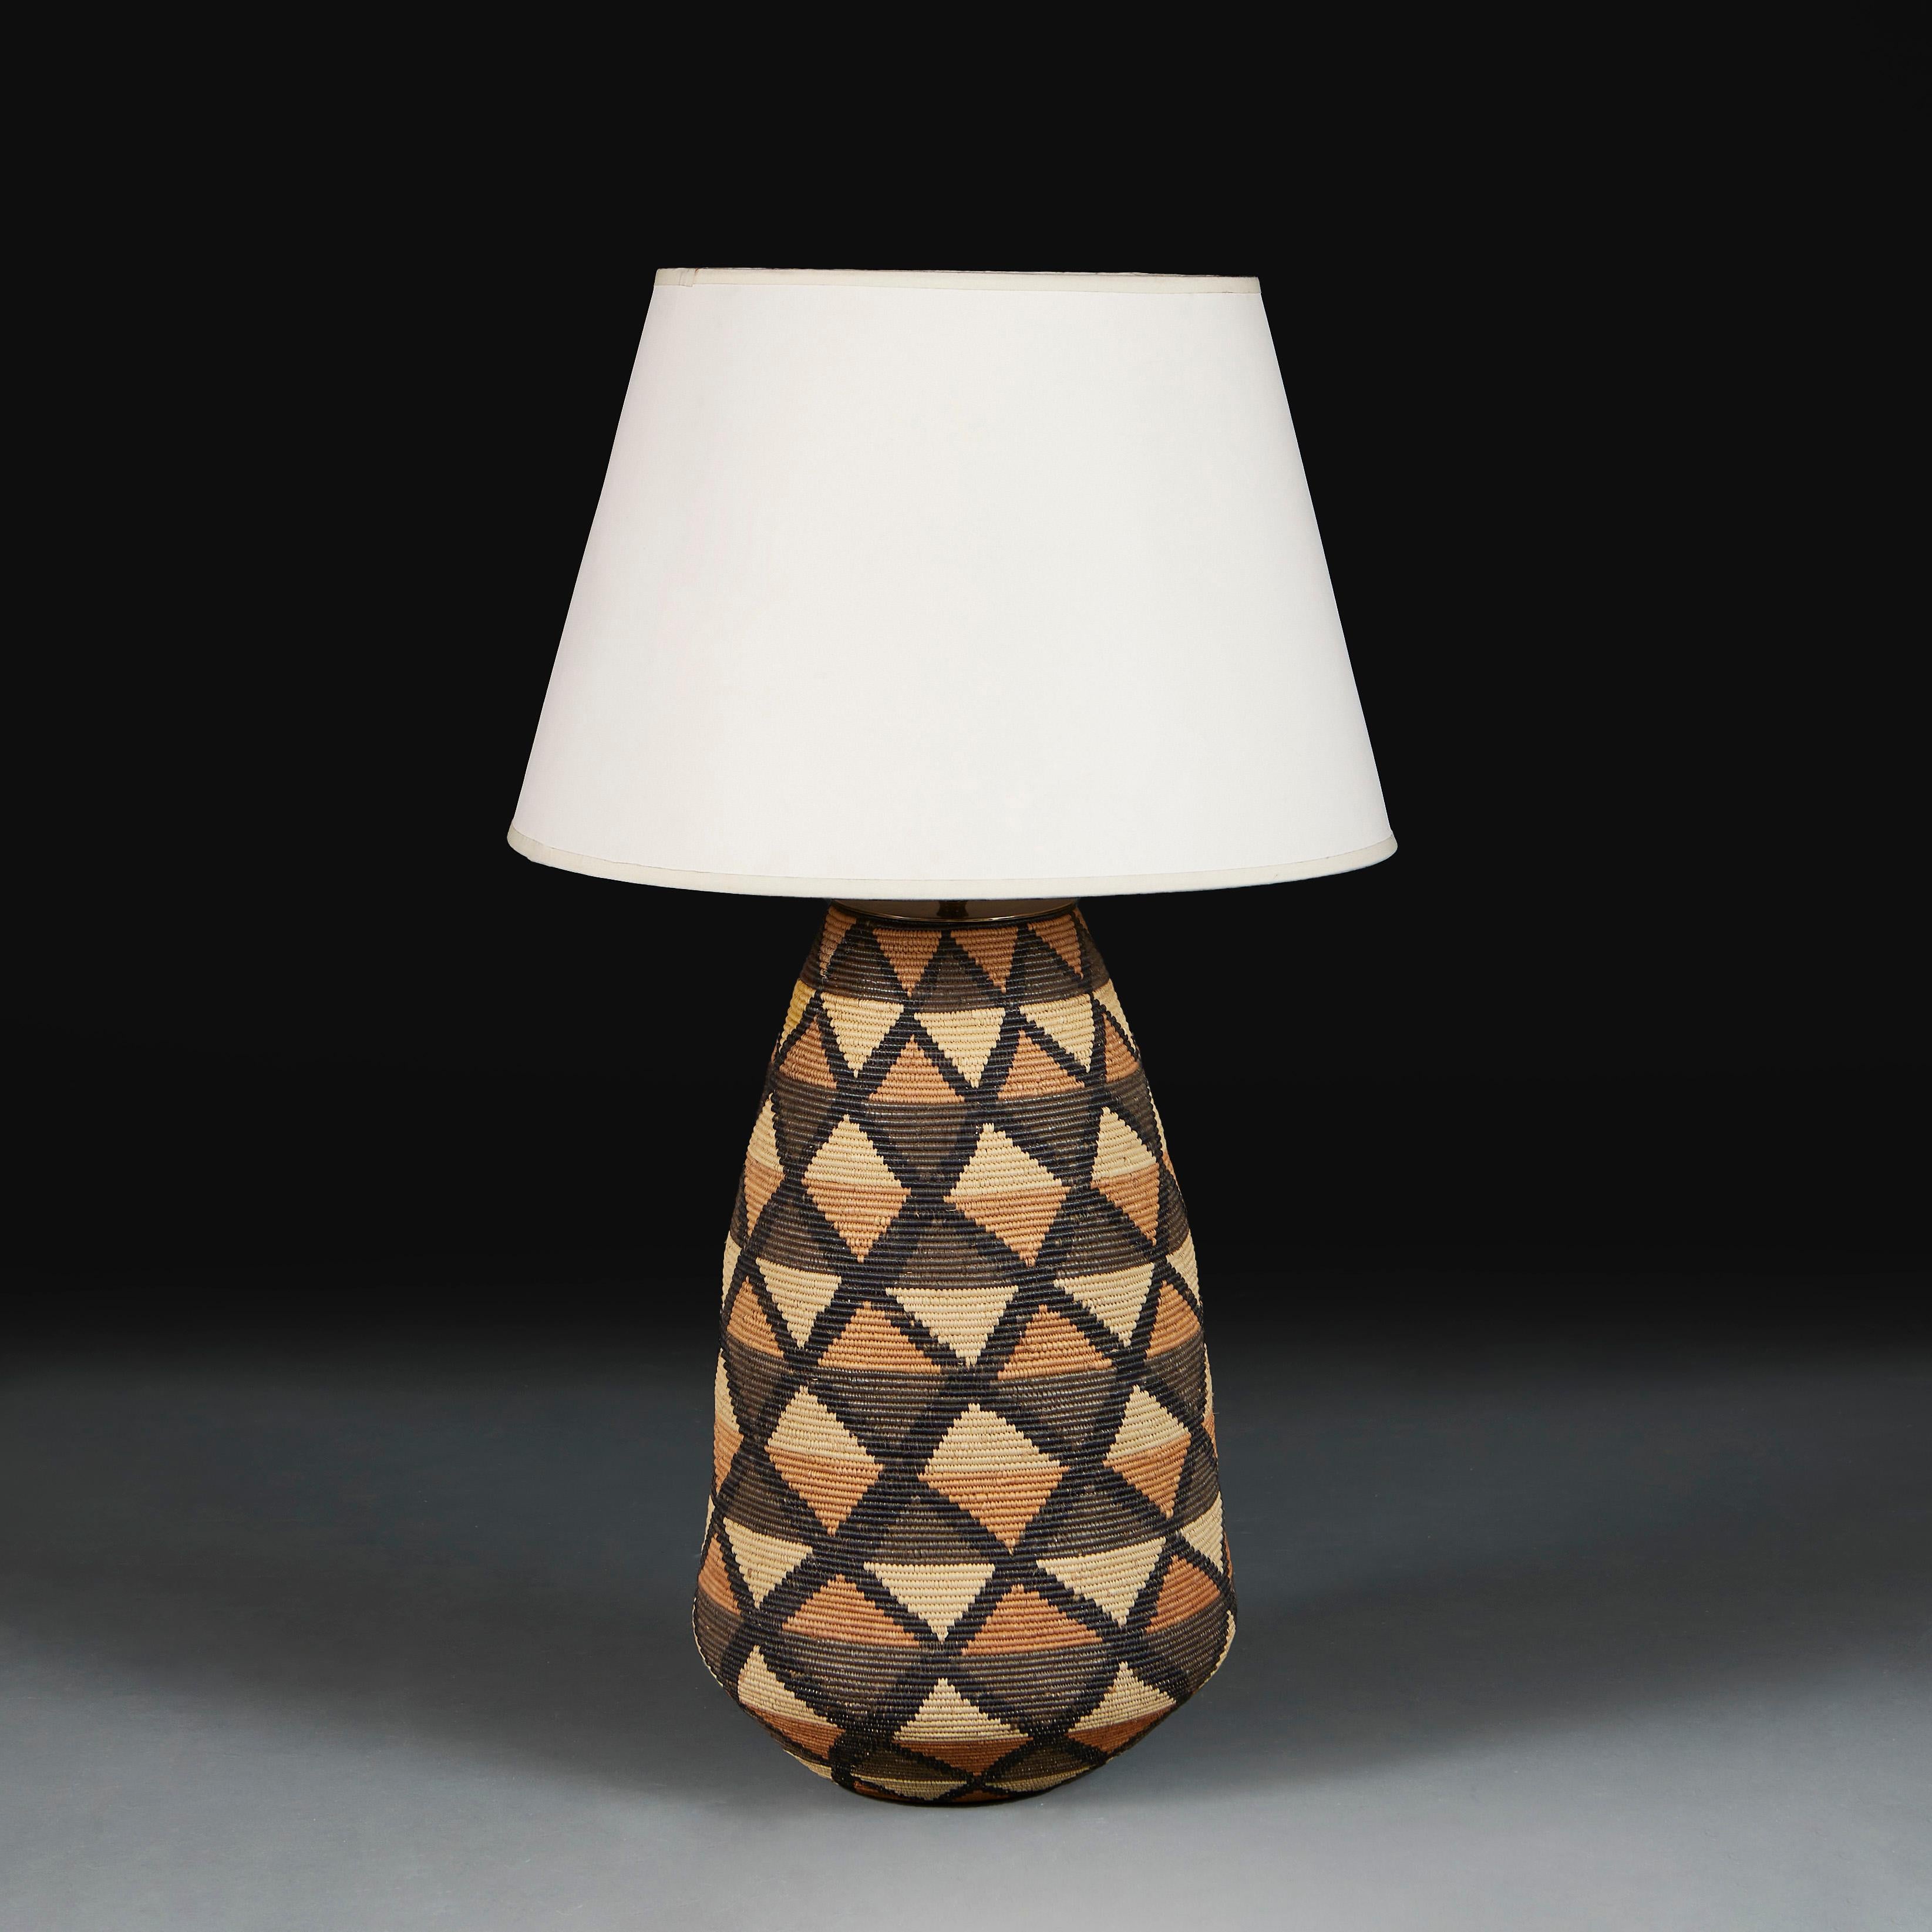 South Africa, circa 1960

An unusual raffia woven basket vase of large scale with a repeating geometric pattern, now converted as a lamp. 

Height of vase 47.00cm

Diameter of base 27.00cm

Photographed with a 18” diameter Pembroke card